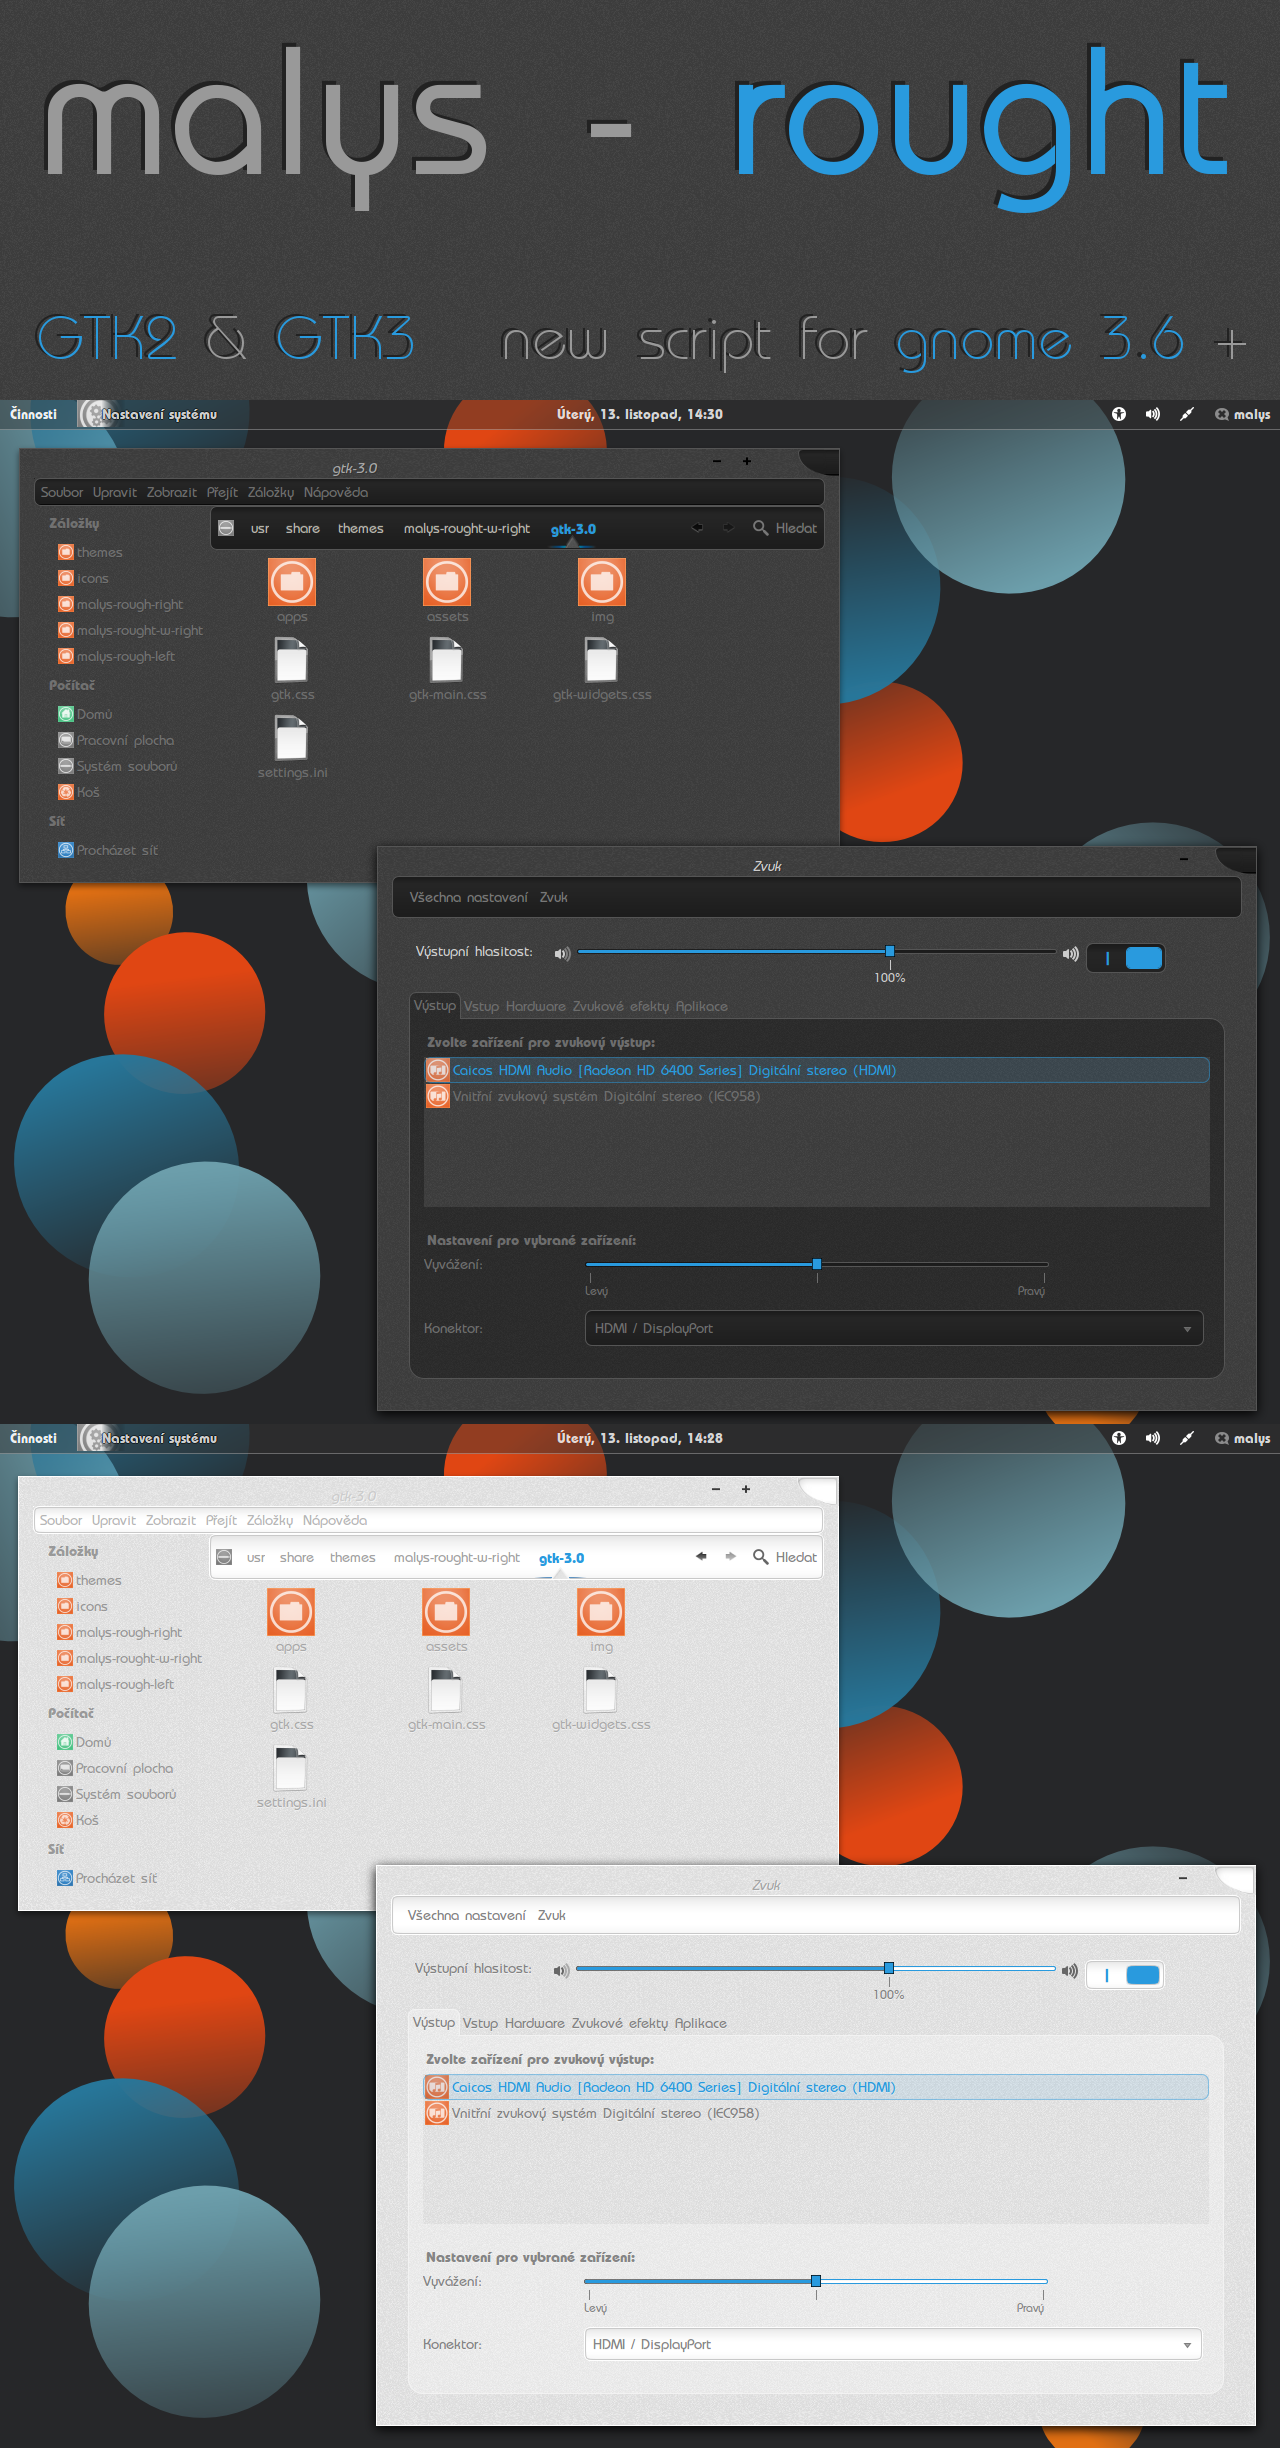 malys - rought 2.0  for  gnome 3.6